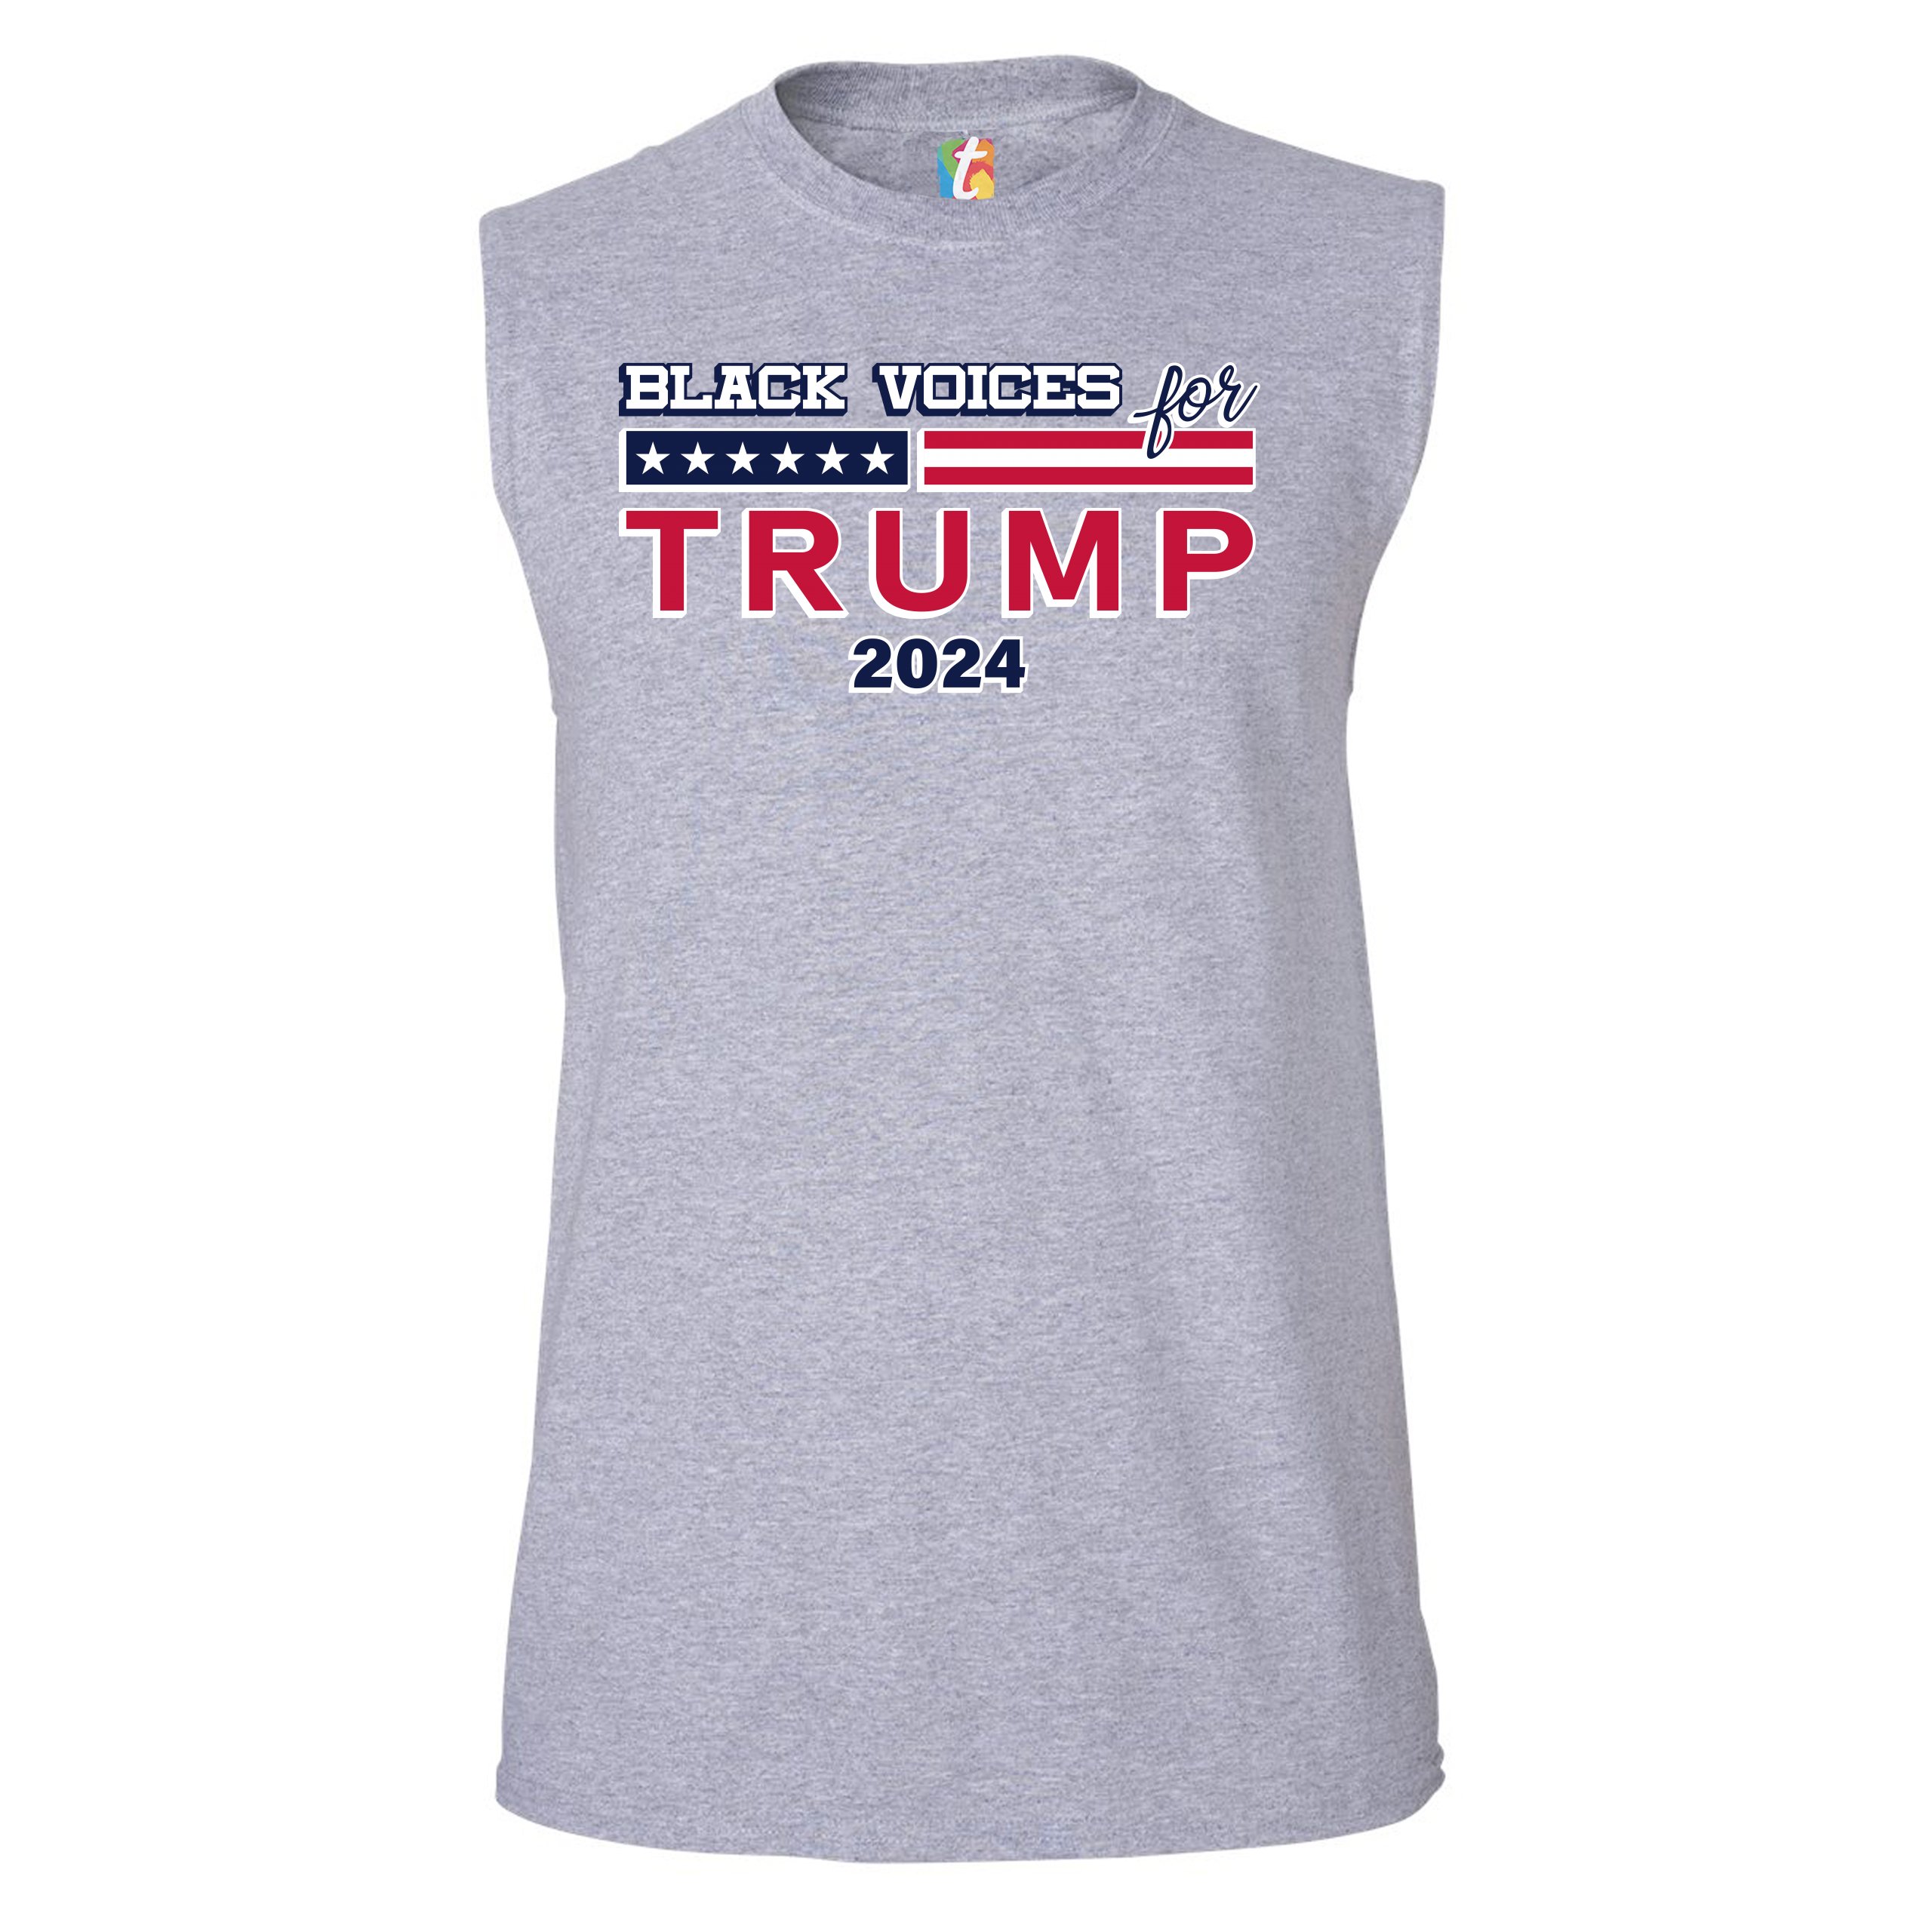 Black Voices For Trump Muscle Shirt Donald Trump 2024 Stars and Stripes